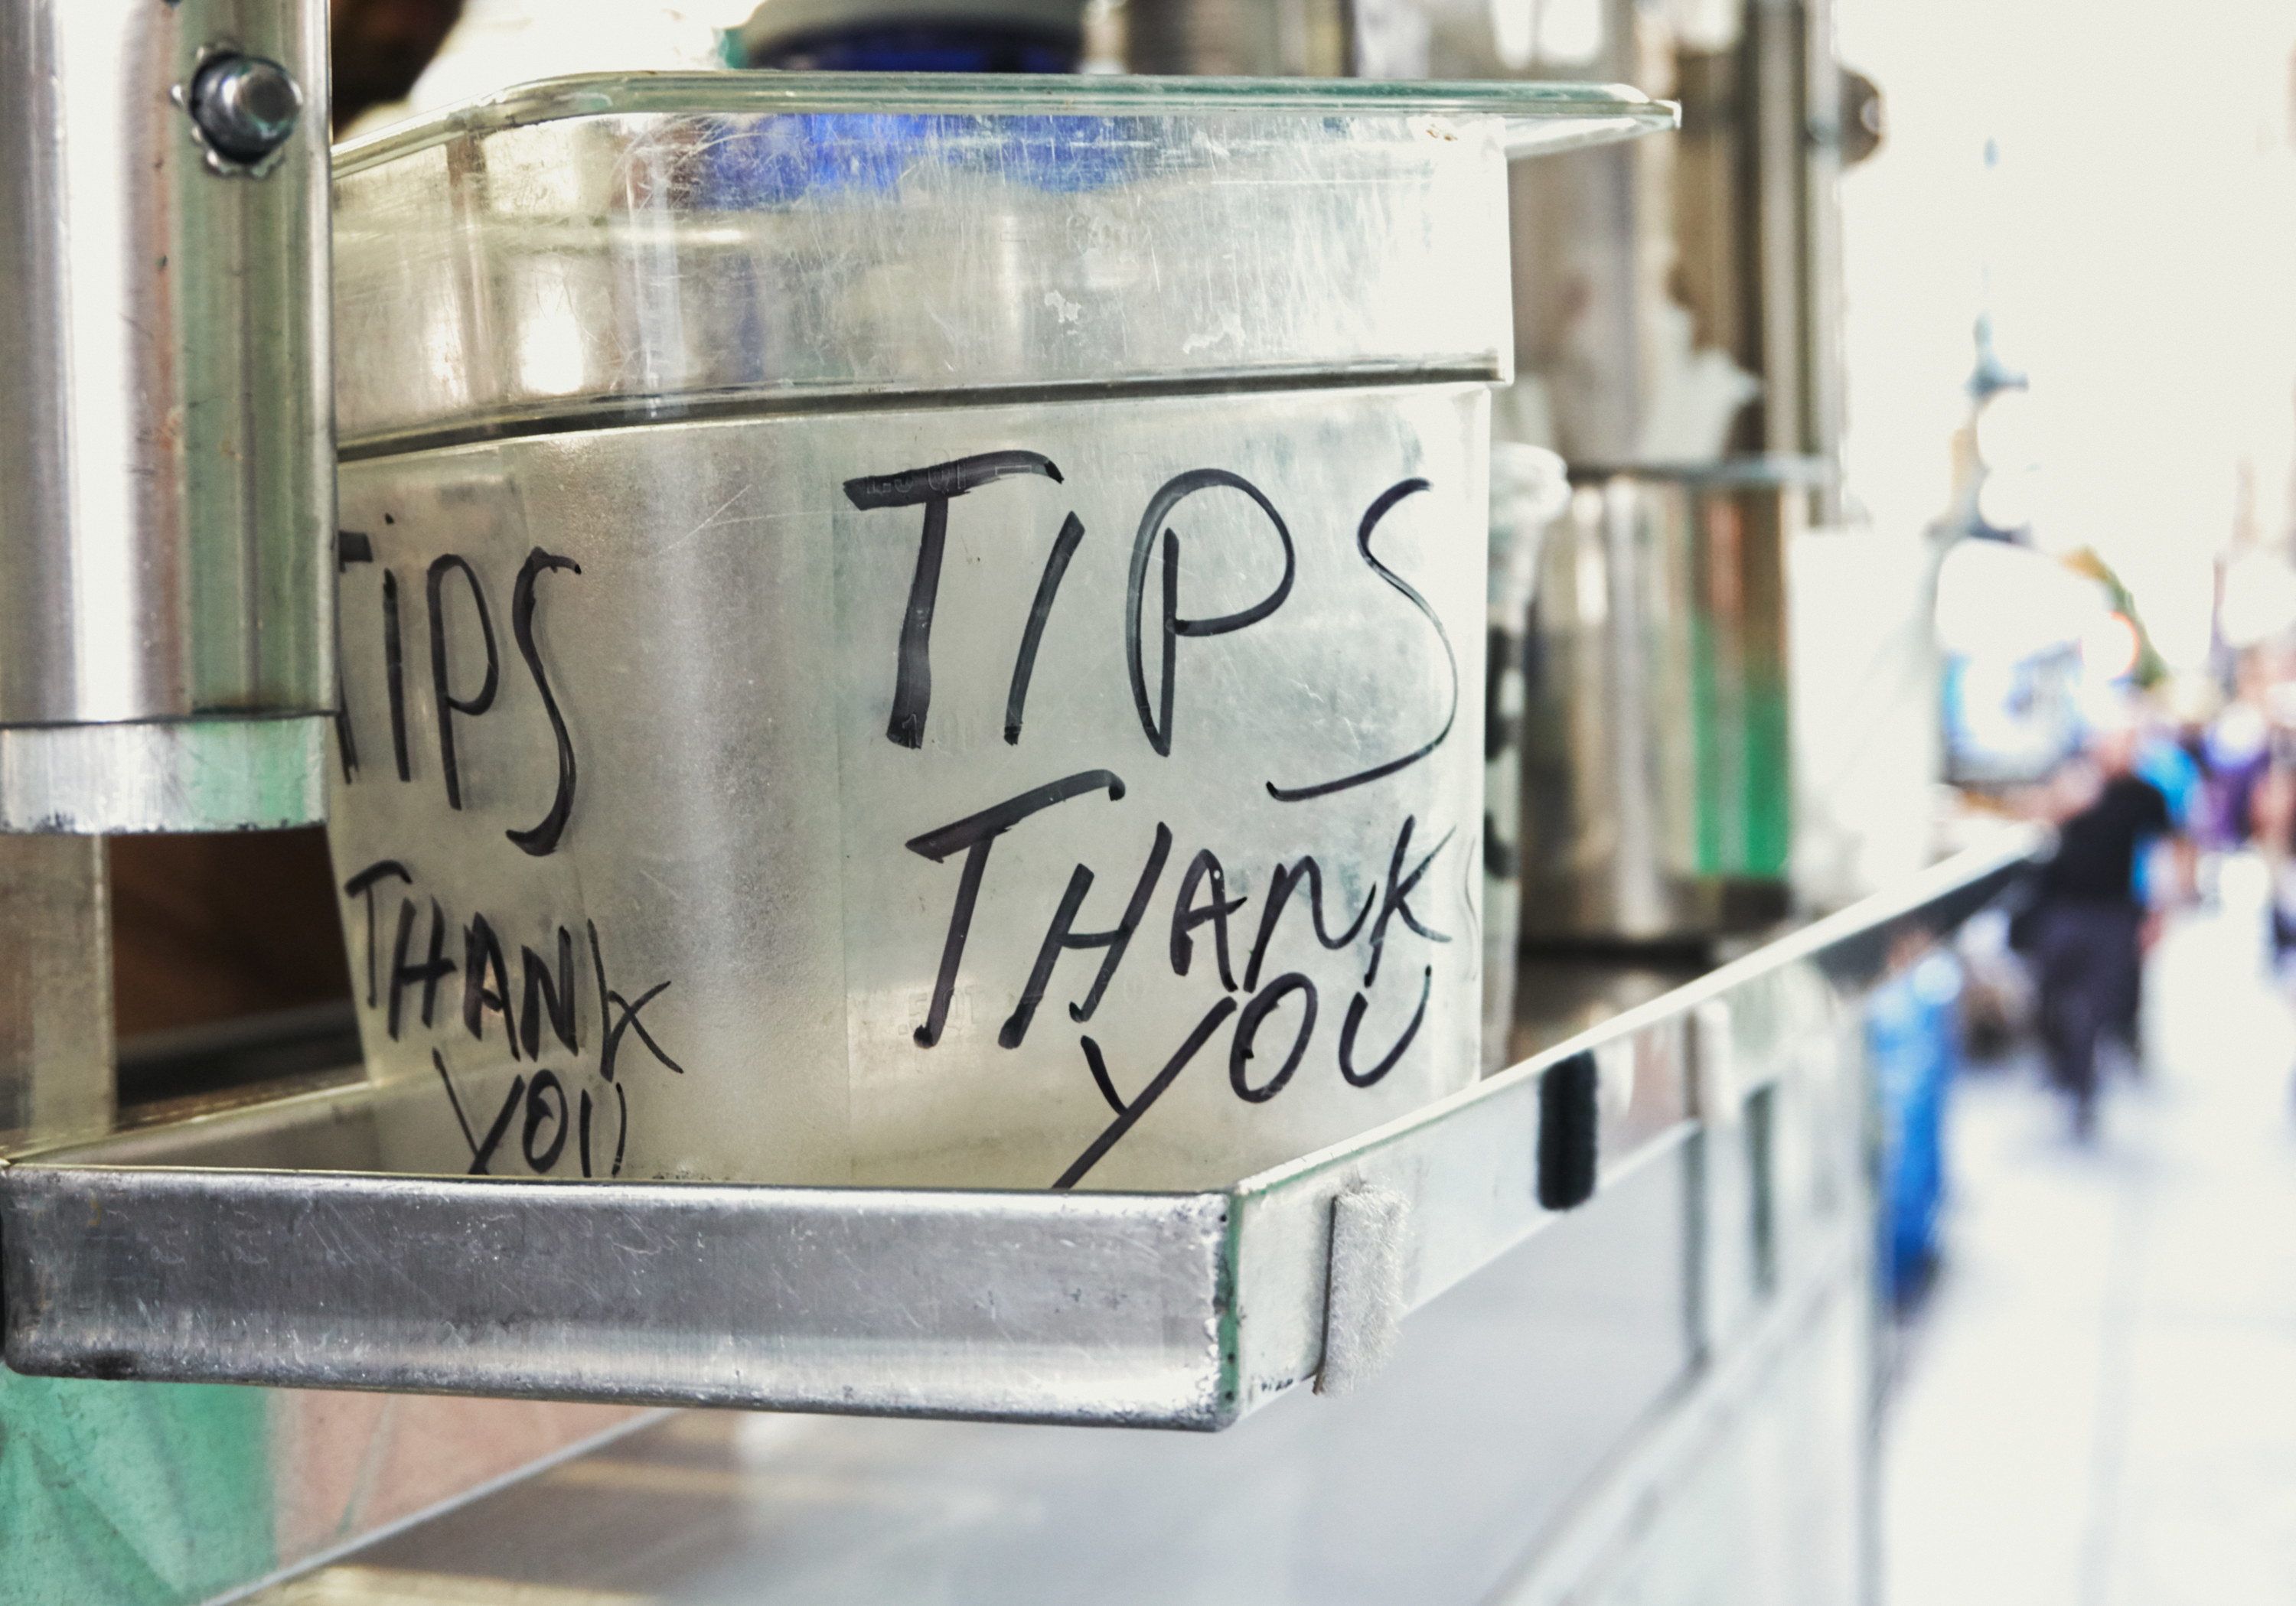 &quot;Tips Thank You&quot; Written on a Plastic Bucket